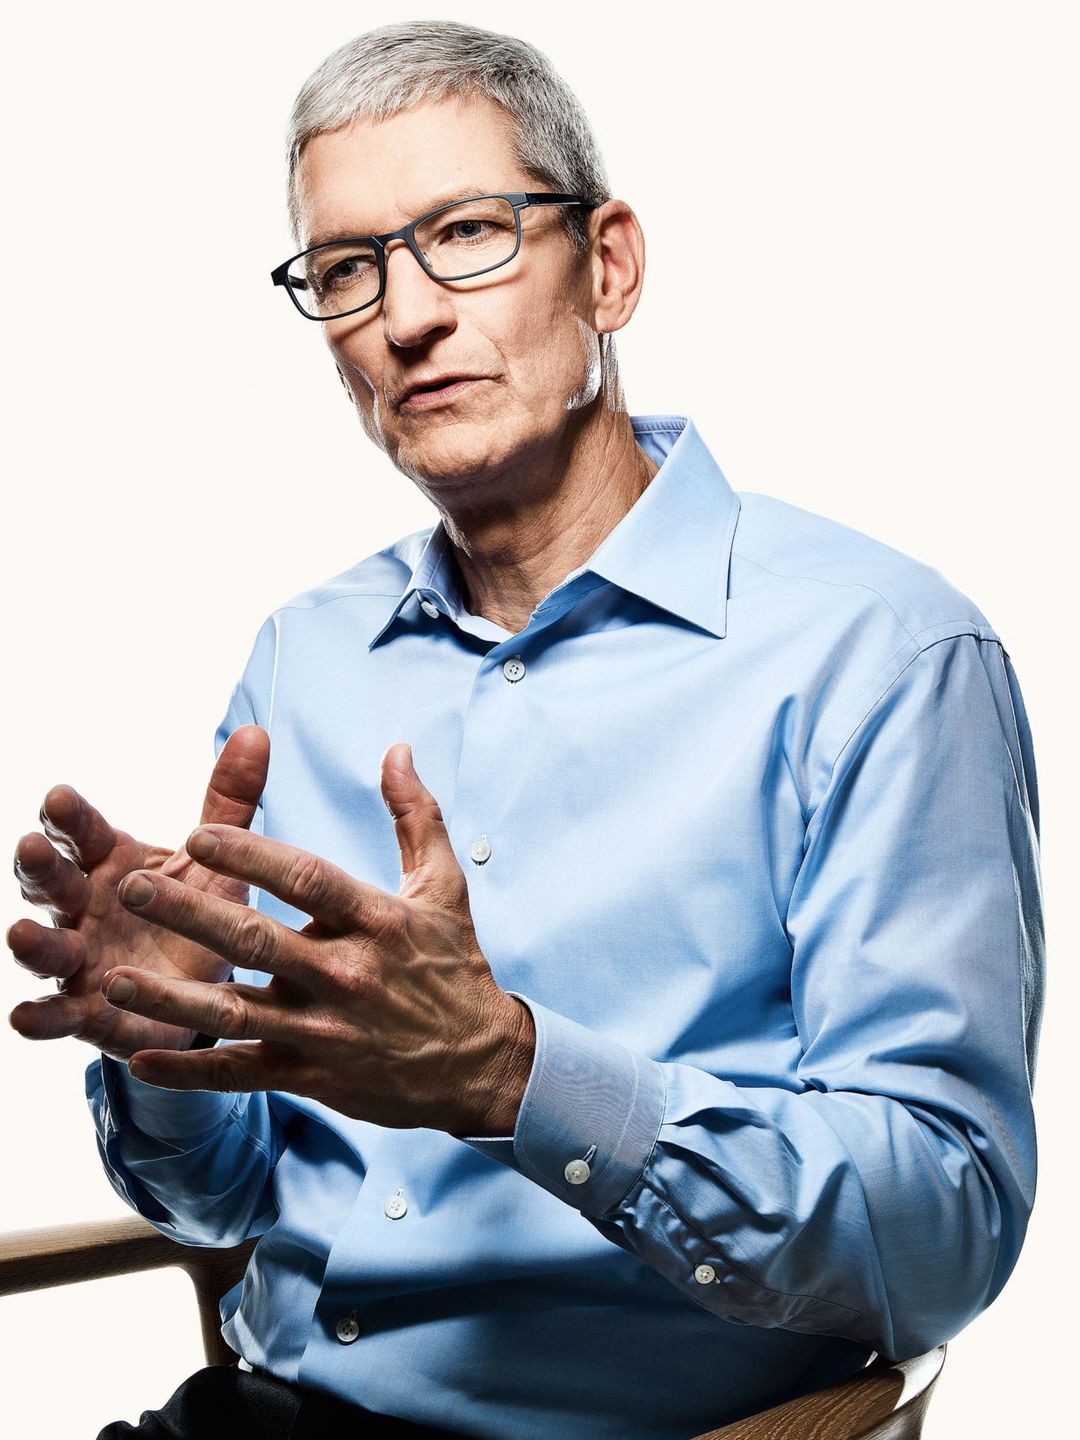 Tim Cook in real life